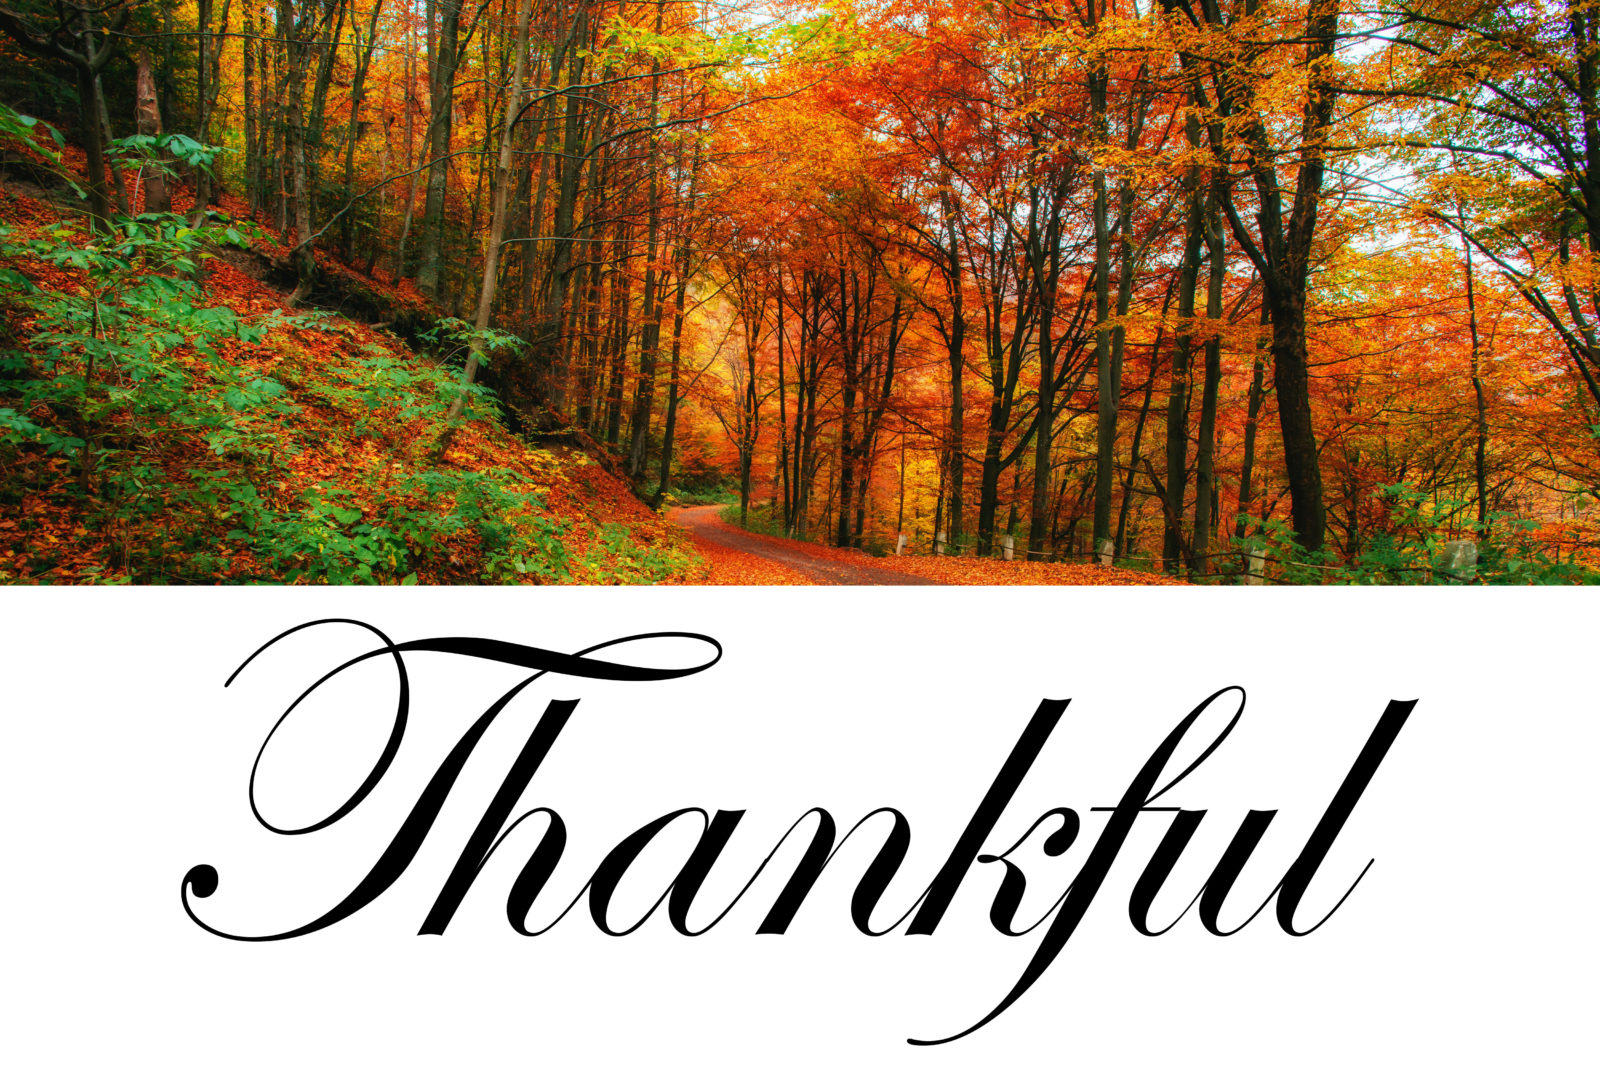 Photo of autumn day in wooded area with colorful yellow, orange, and red leaves on trees and ground. Scripted font underneath "Thankful".